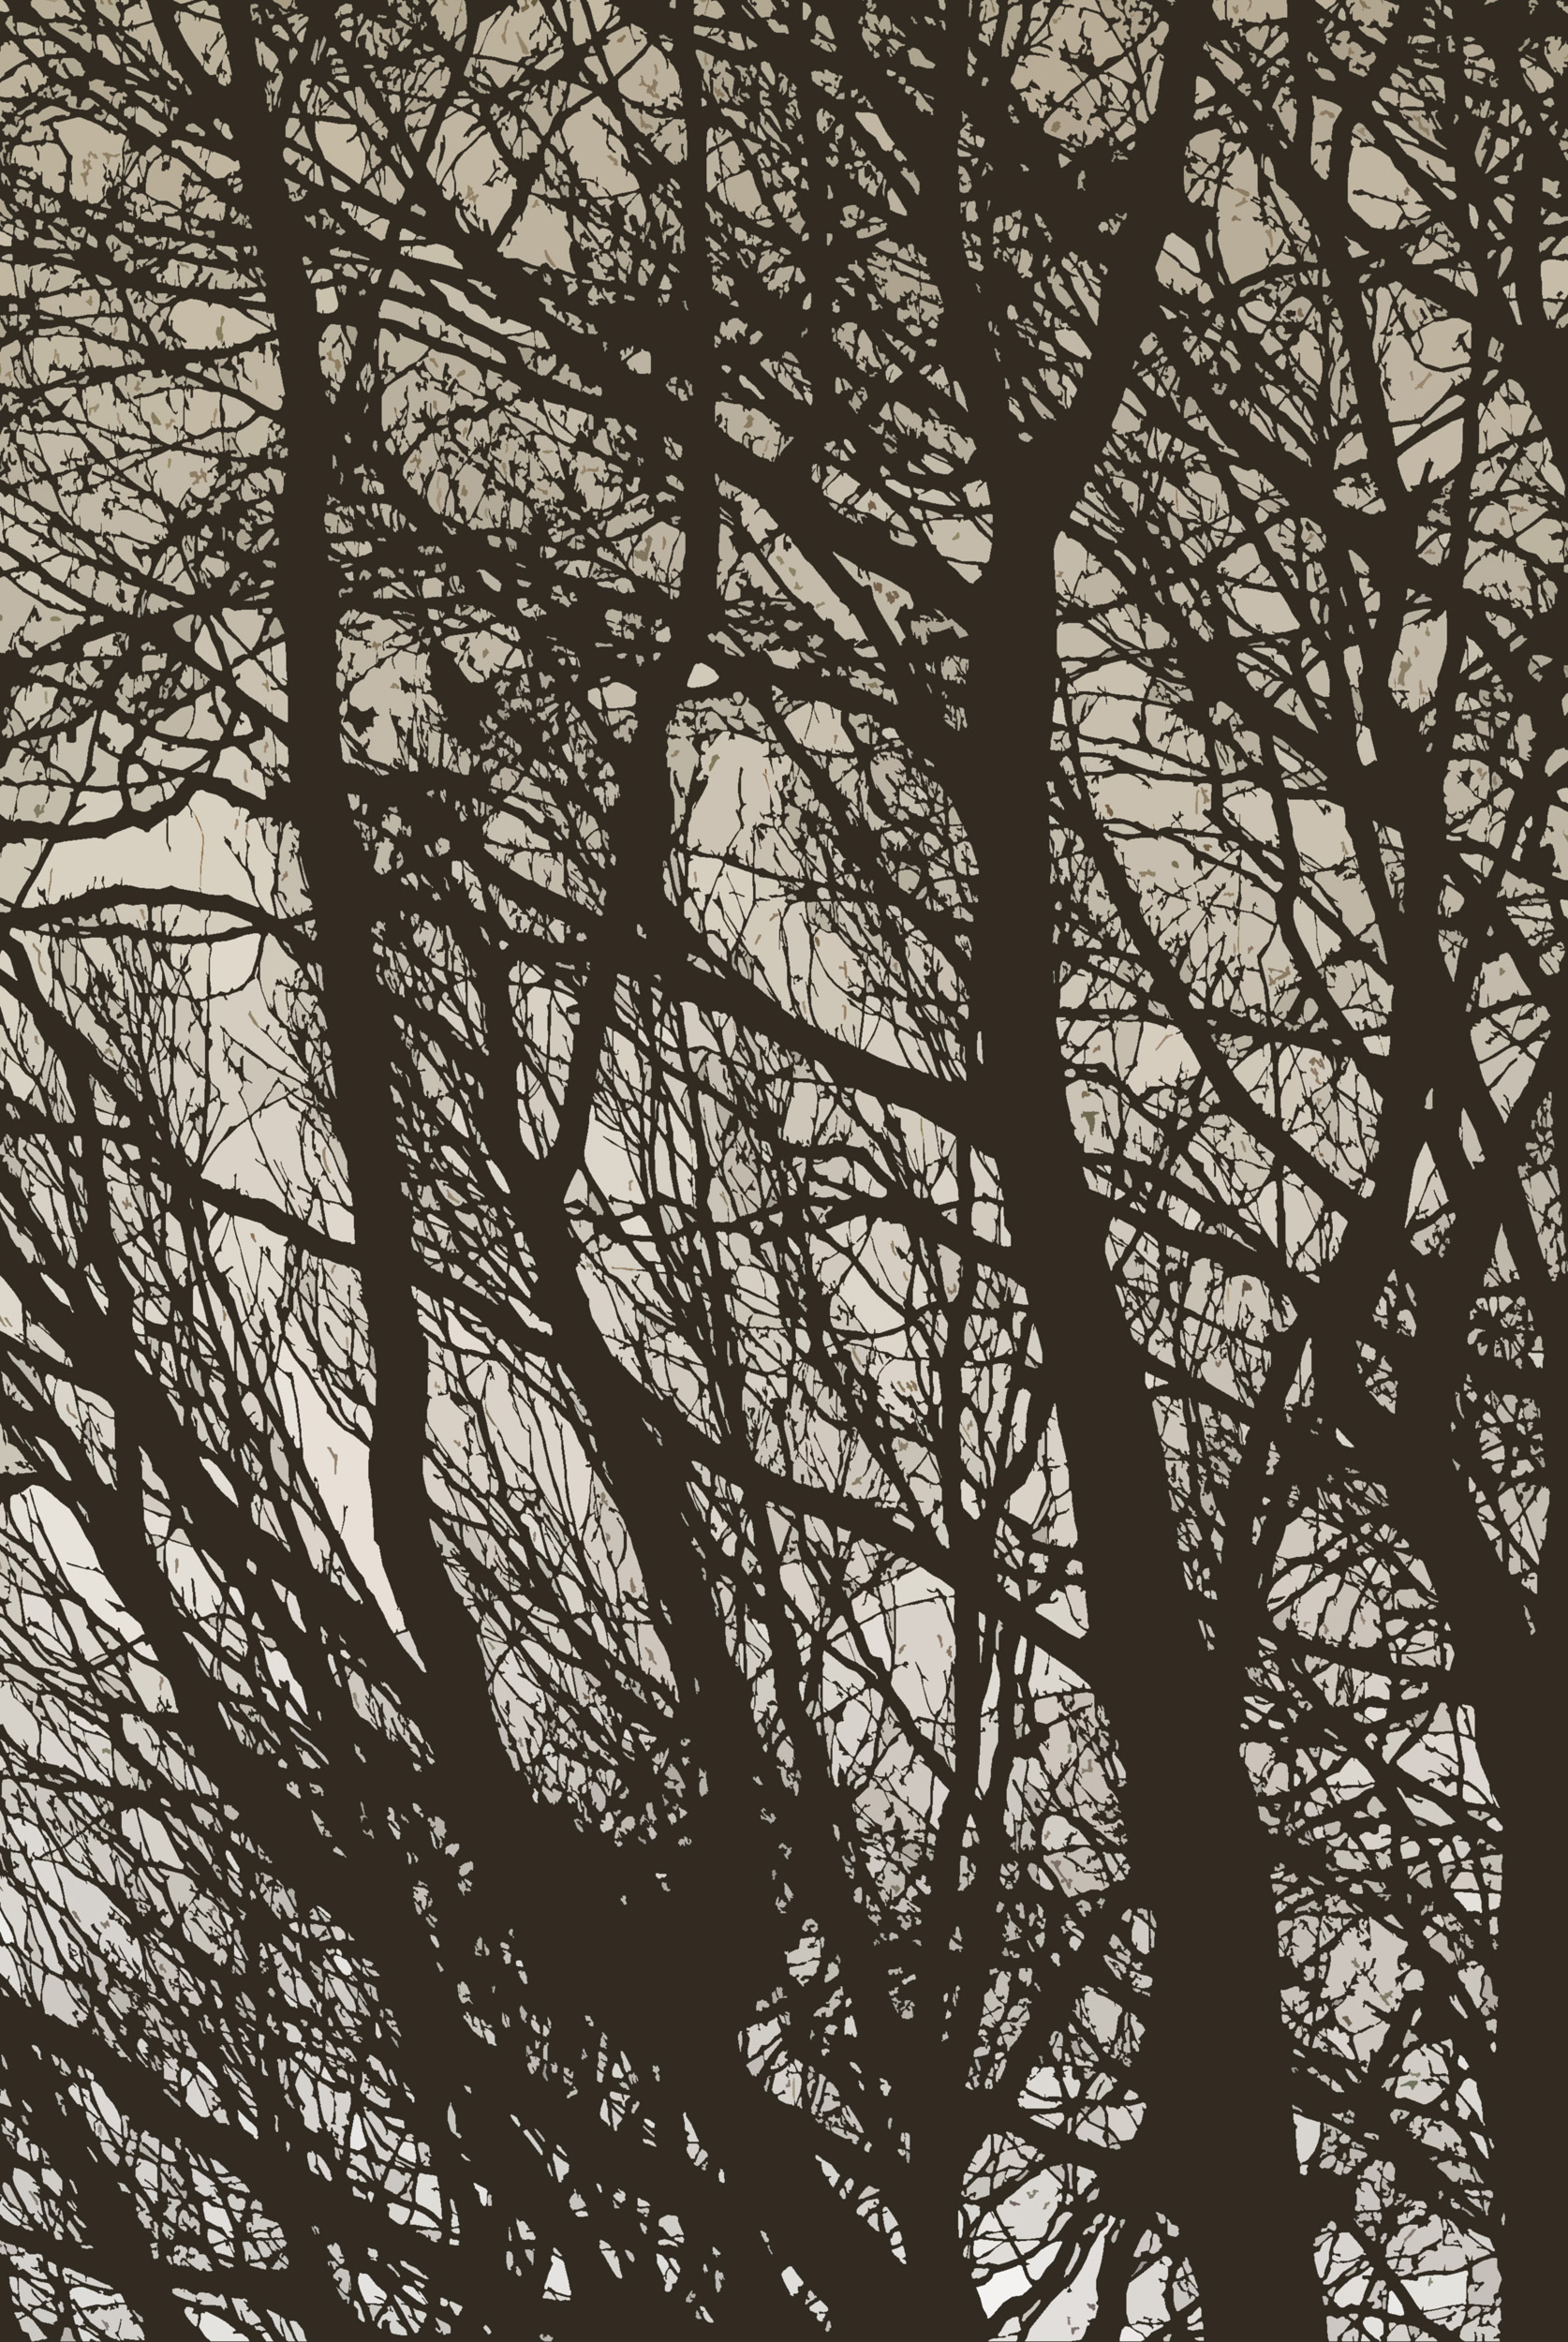 Download PC Wallpaper trees, minimalism, branches, bw, chb